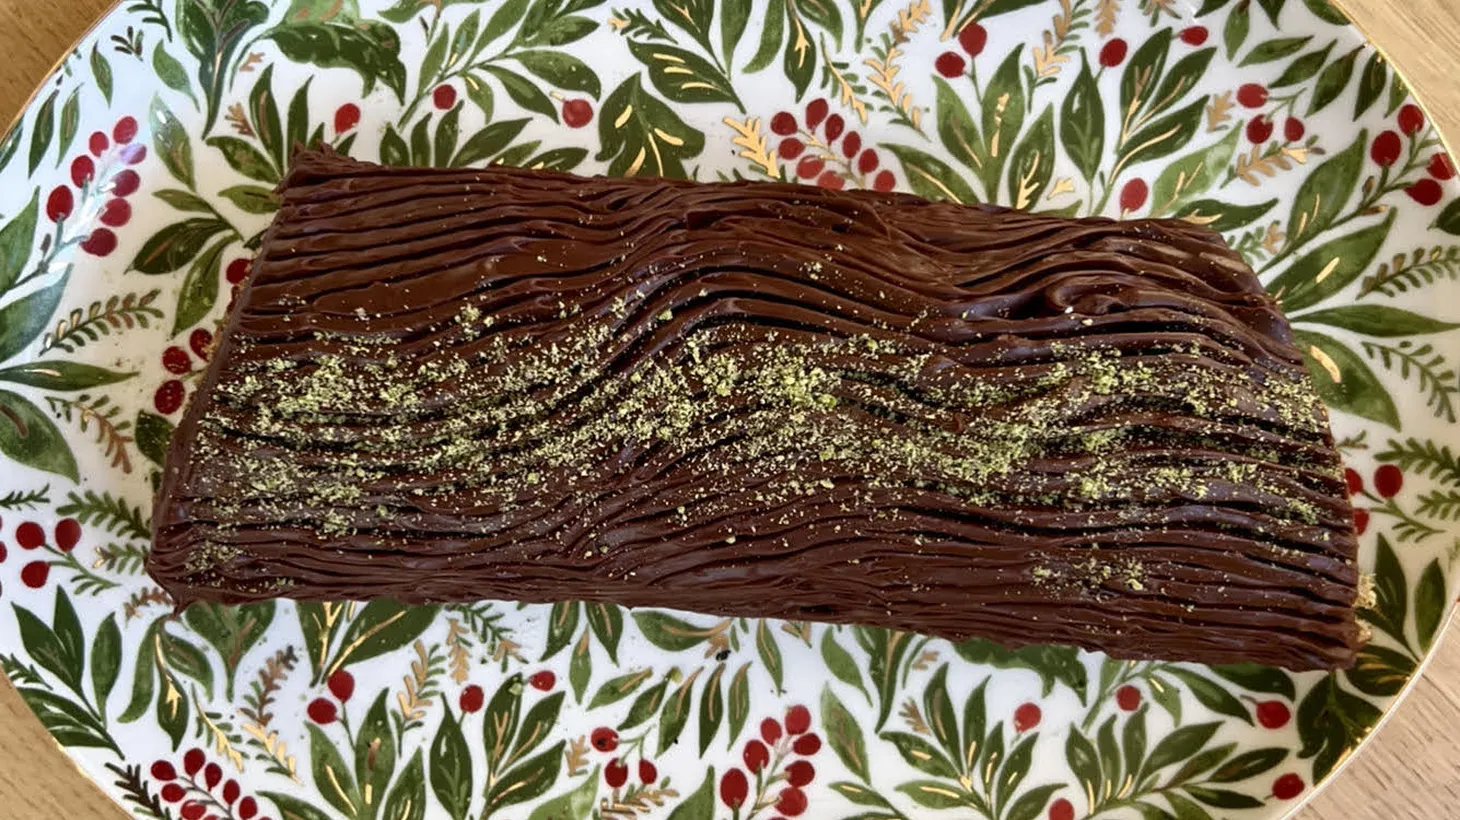 Sponge cake and buttercream compose a yule log or Bûche De Noël, a Christmas tradition in France.